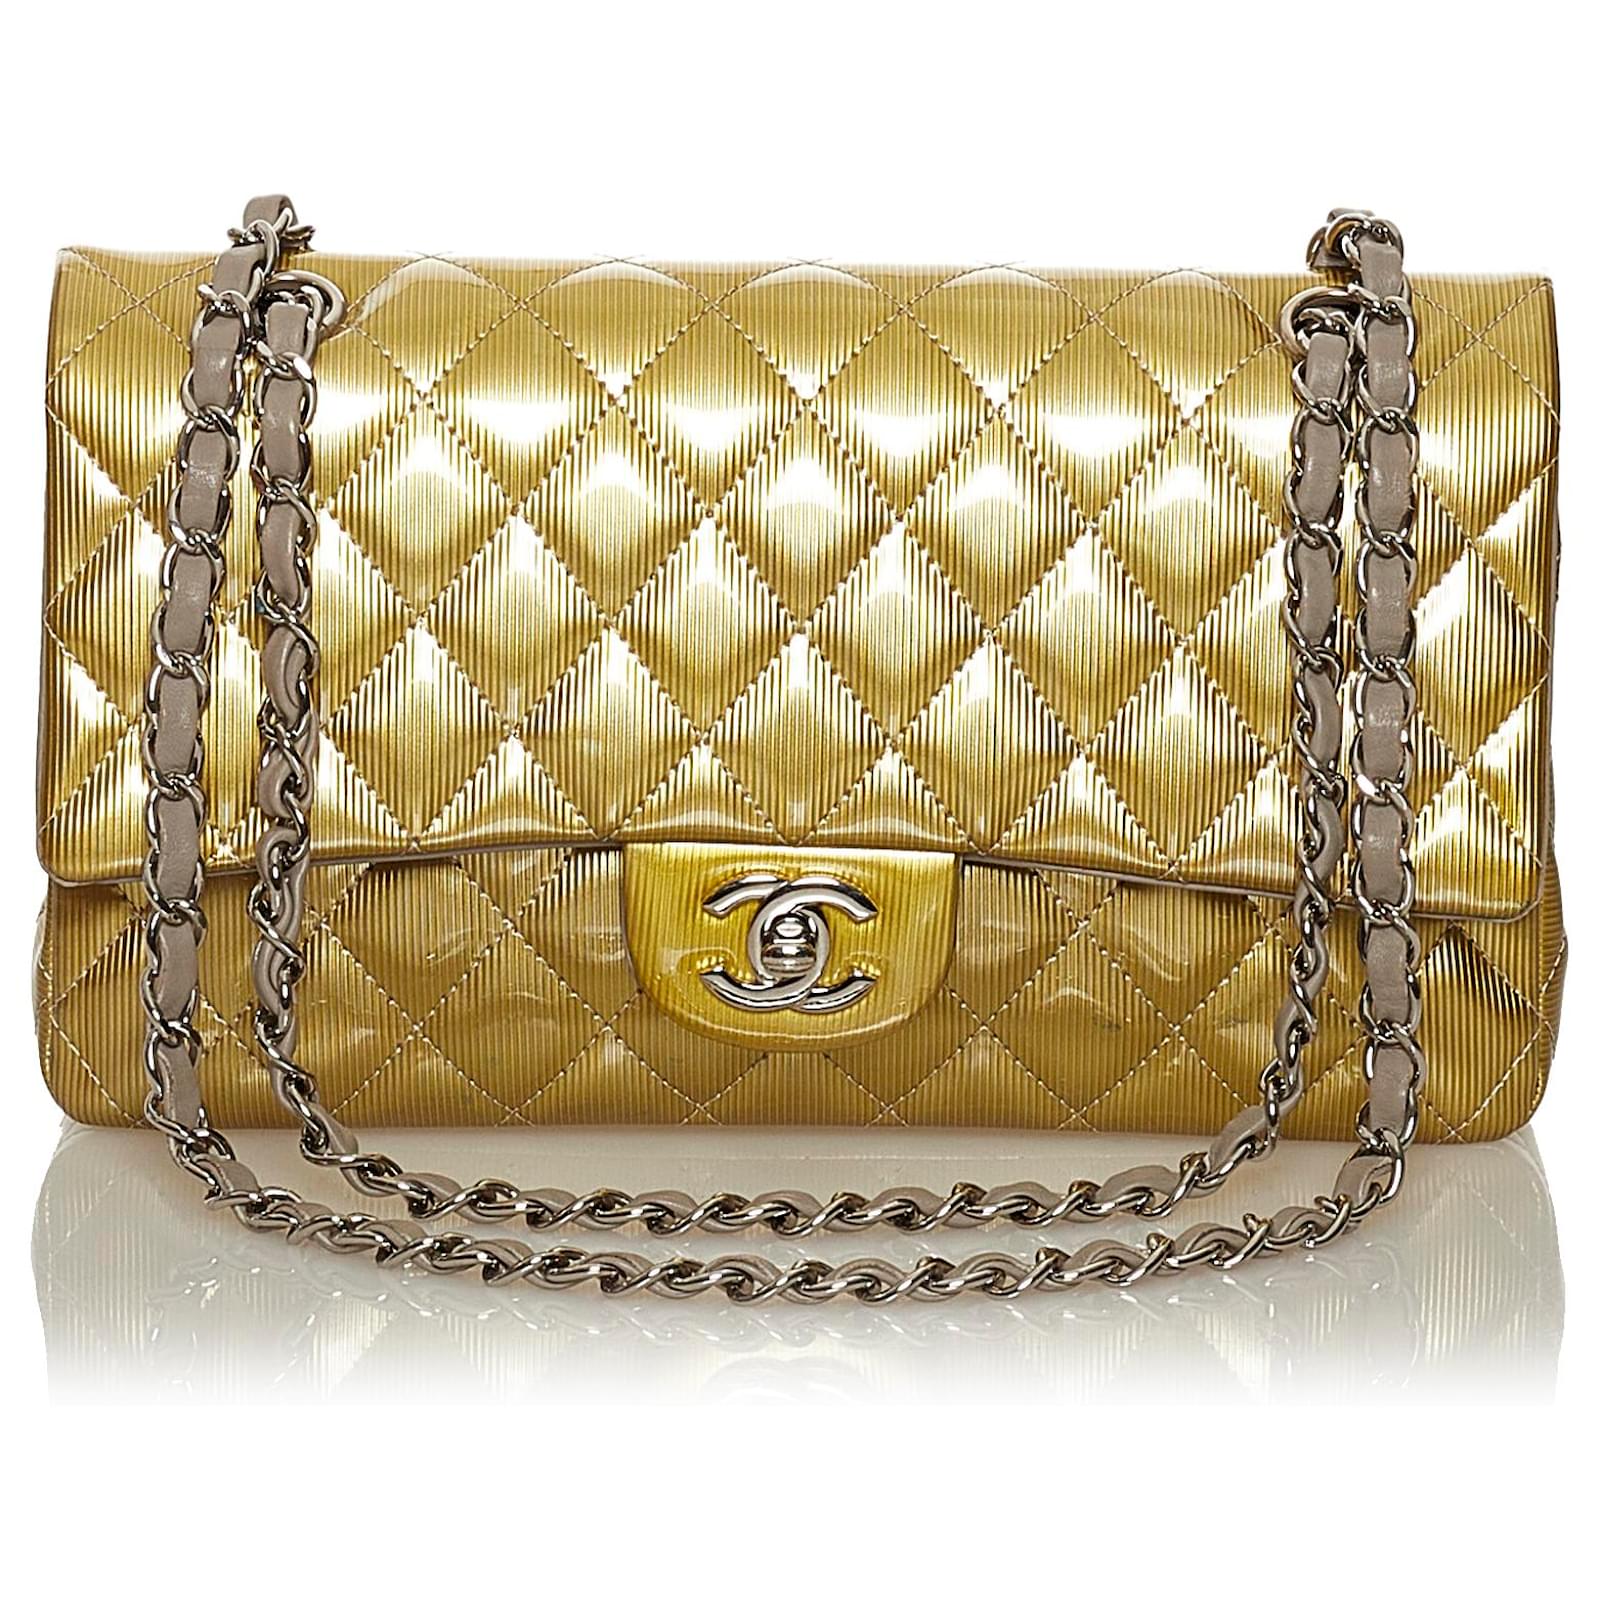 Chanel Gold Classic Patent Leather lined Flap Bag Golden ref